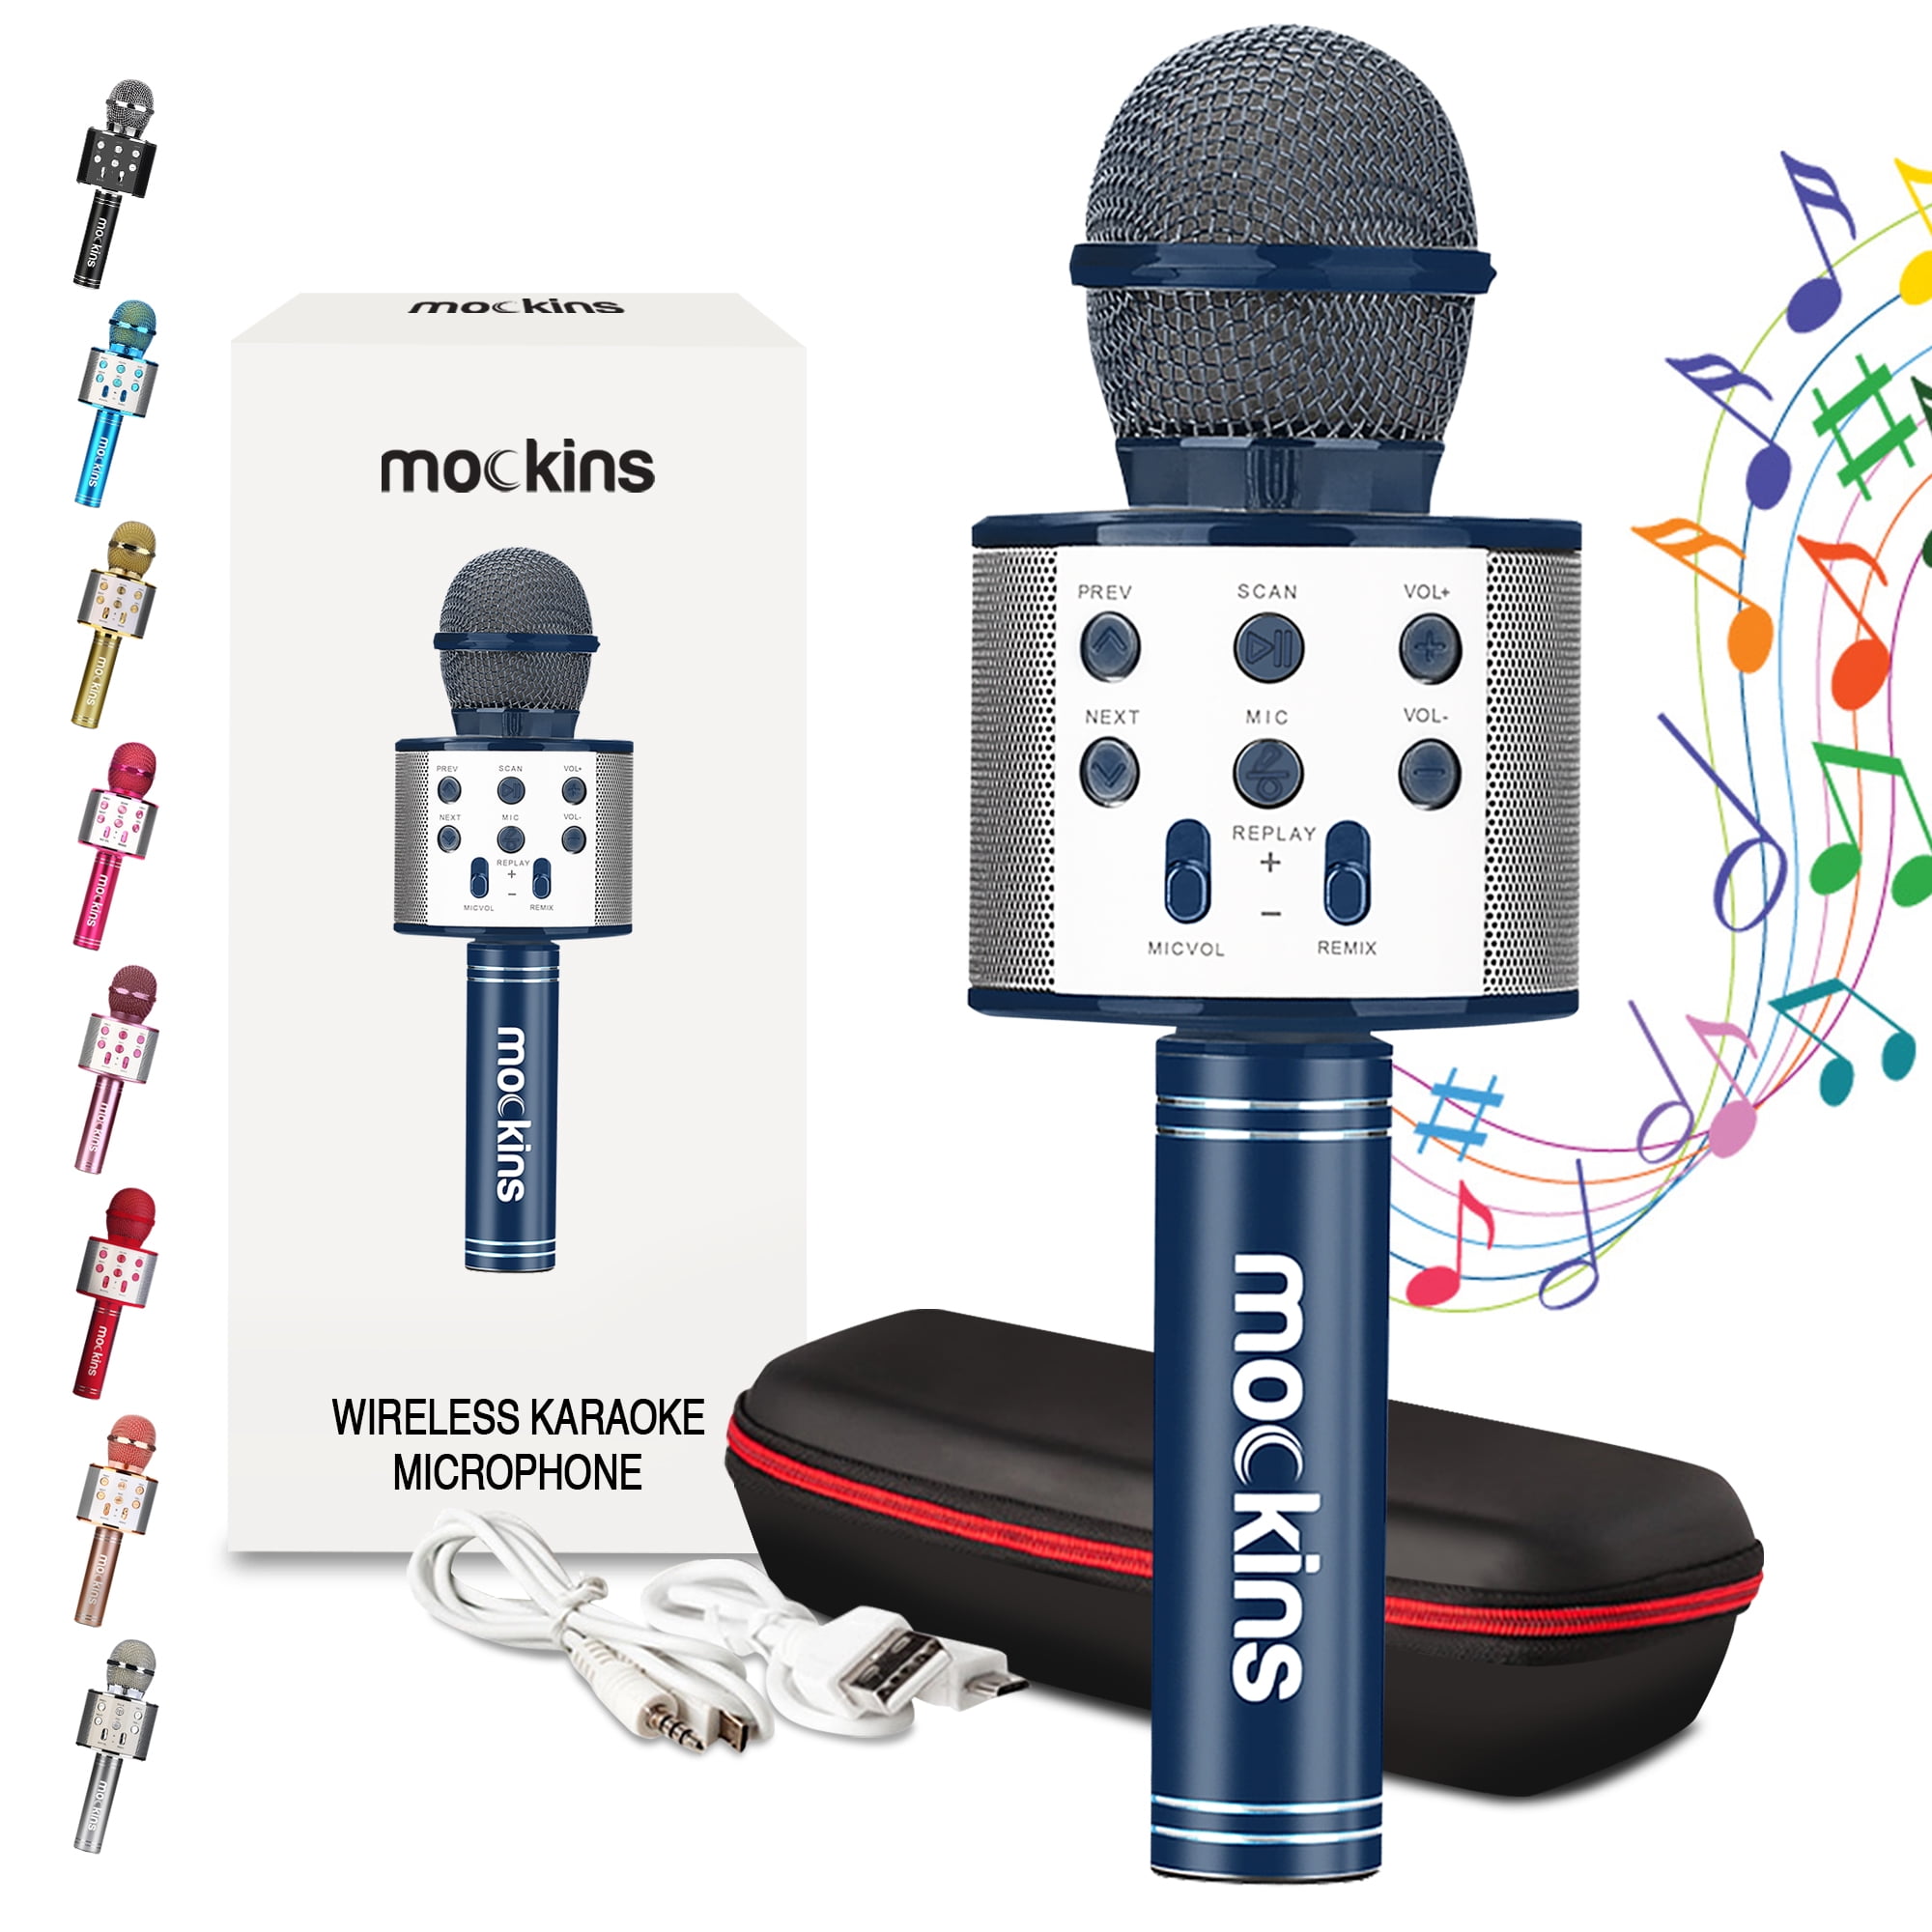 Wireless Microphone,Karaoke machine Portable Bluetooth Microphone with Speaker Handheld Microphone for Home Party Singing and Conference Compatible with Android and iOS Devices